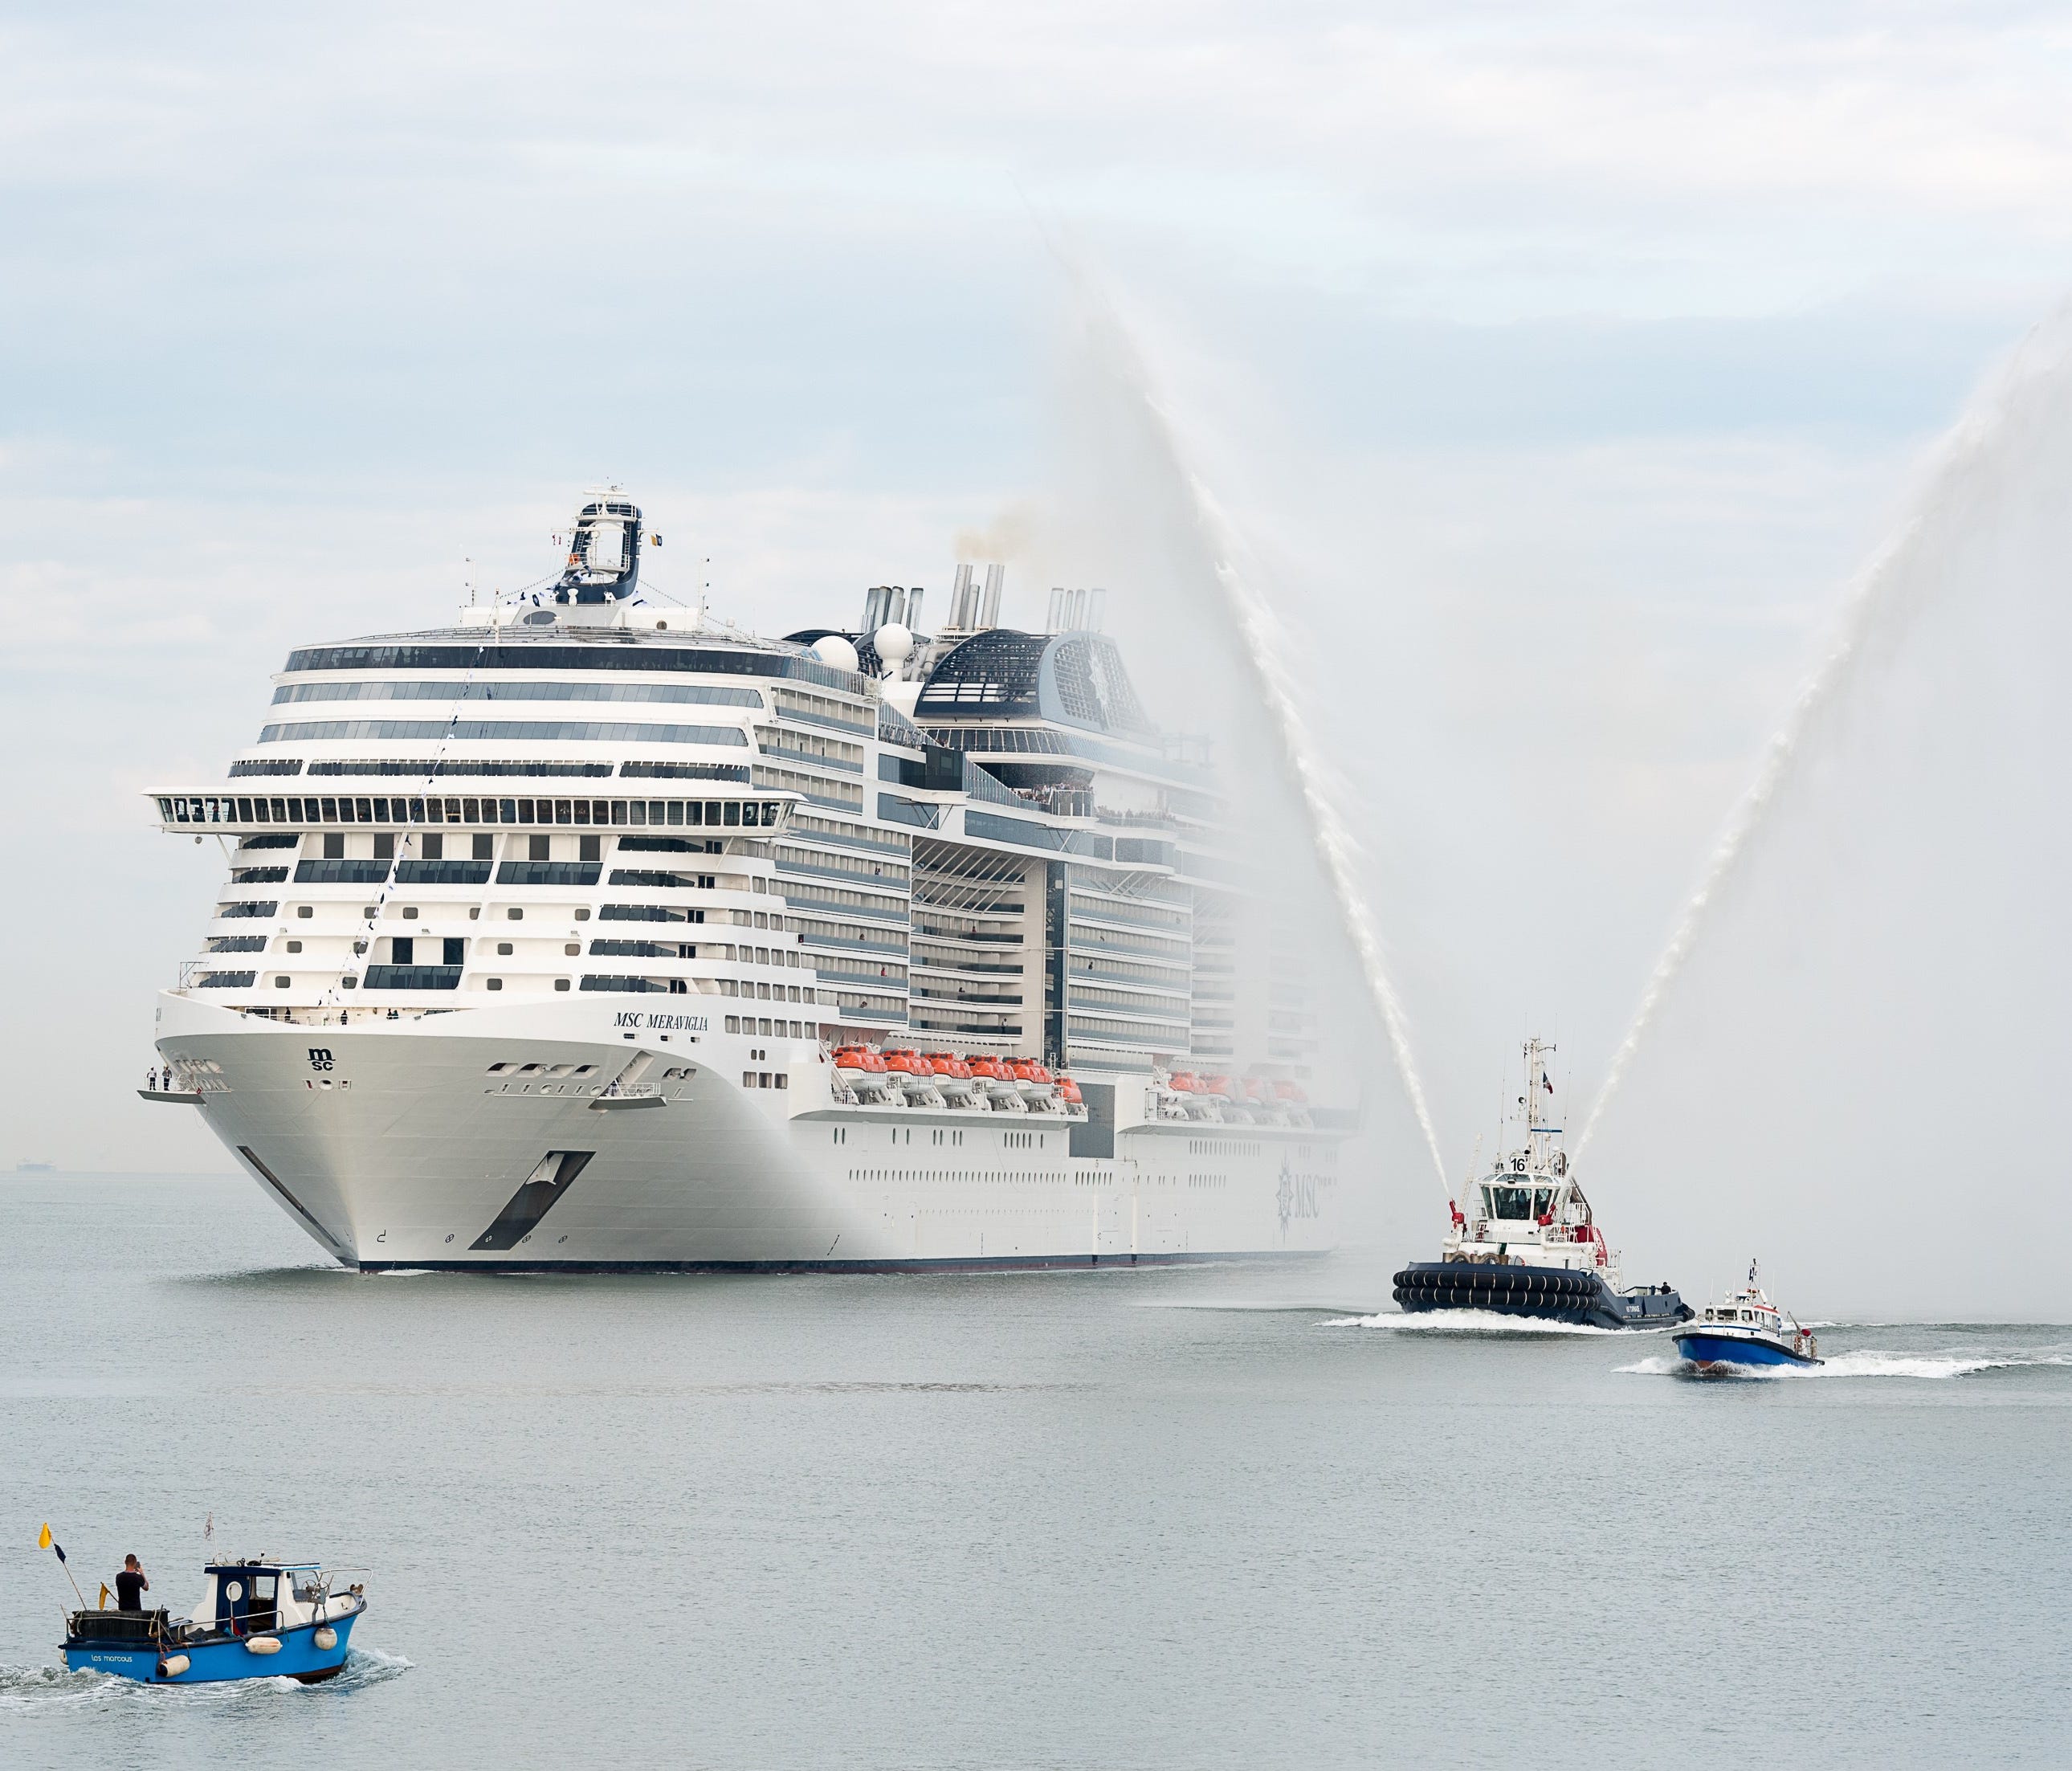 MSC Cruises' new MSC Meraviglia arrives in Le Havre, France on July 2, 2017 in advance of its christening.